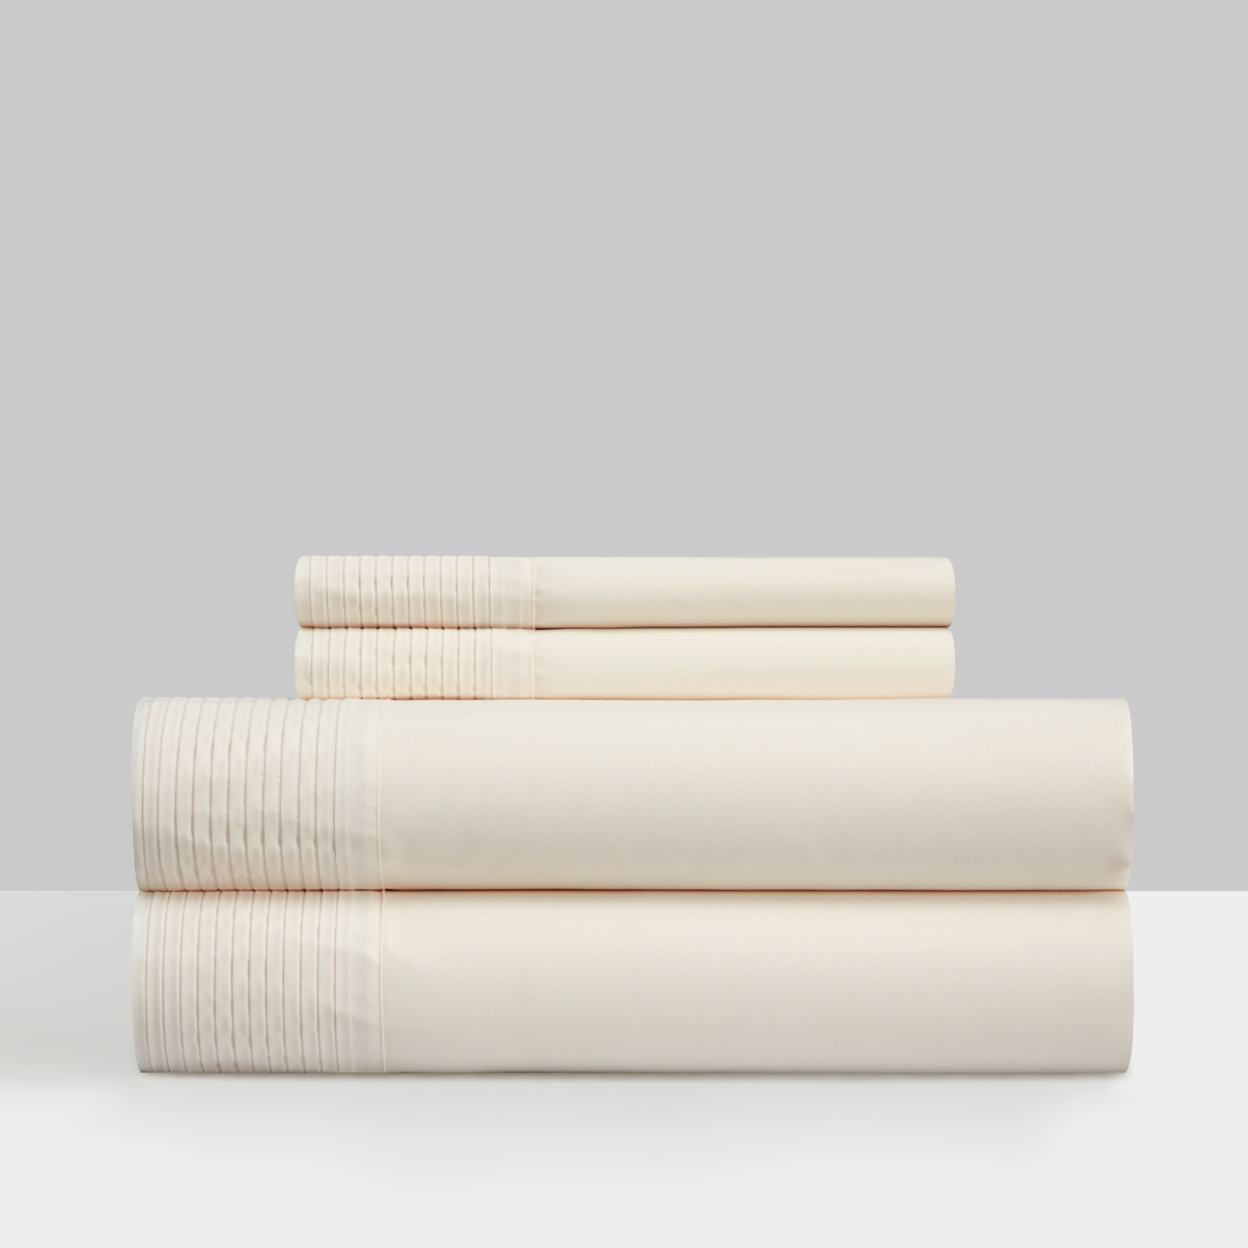 Barley 3 Or 4 Piece Sheet Set Solid Color With Pleated Details - Beige, Twin